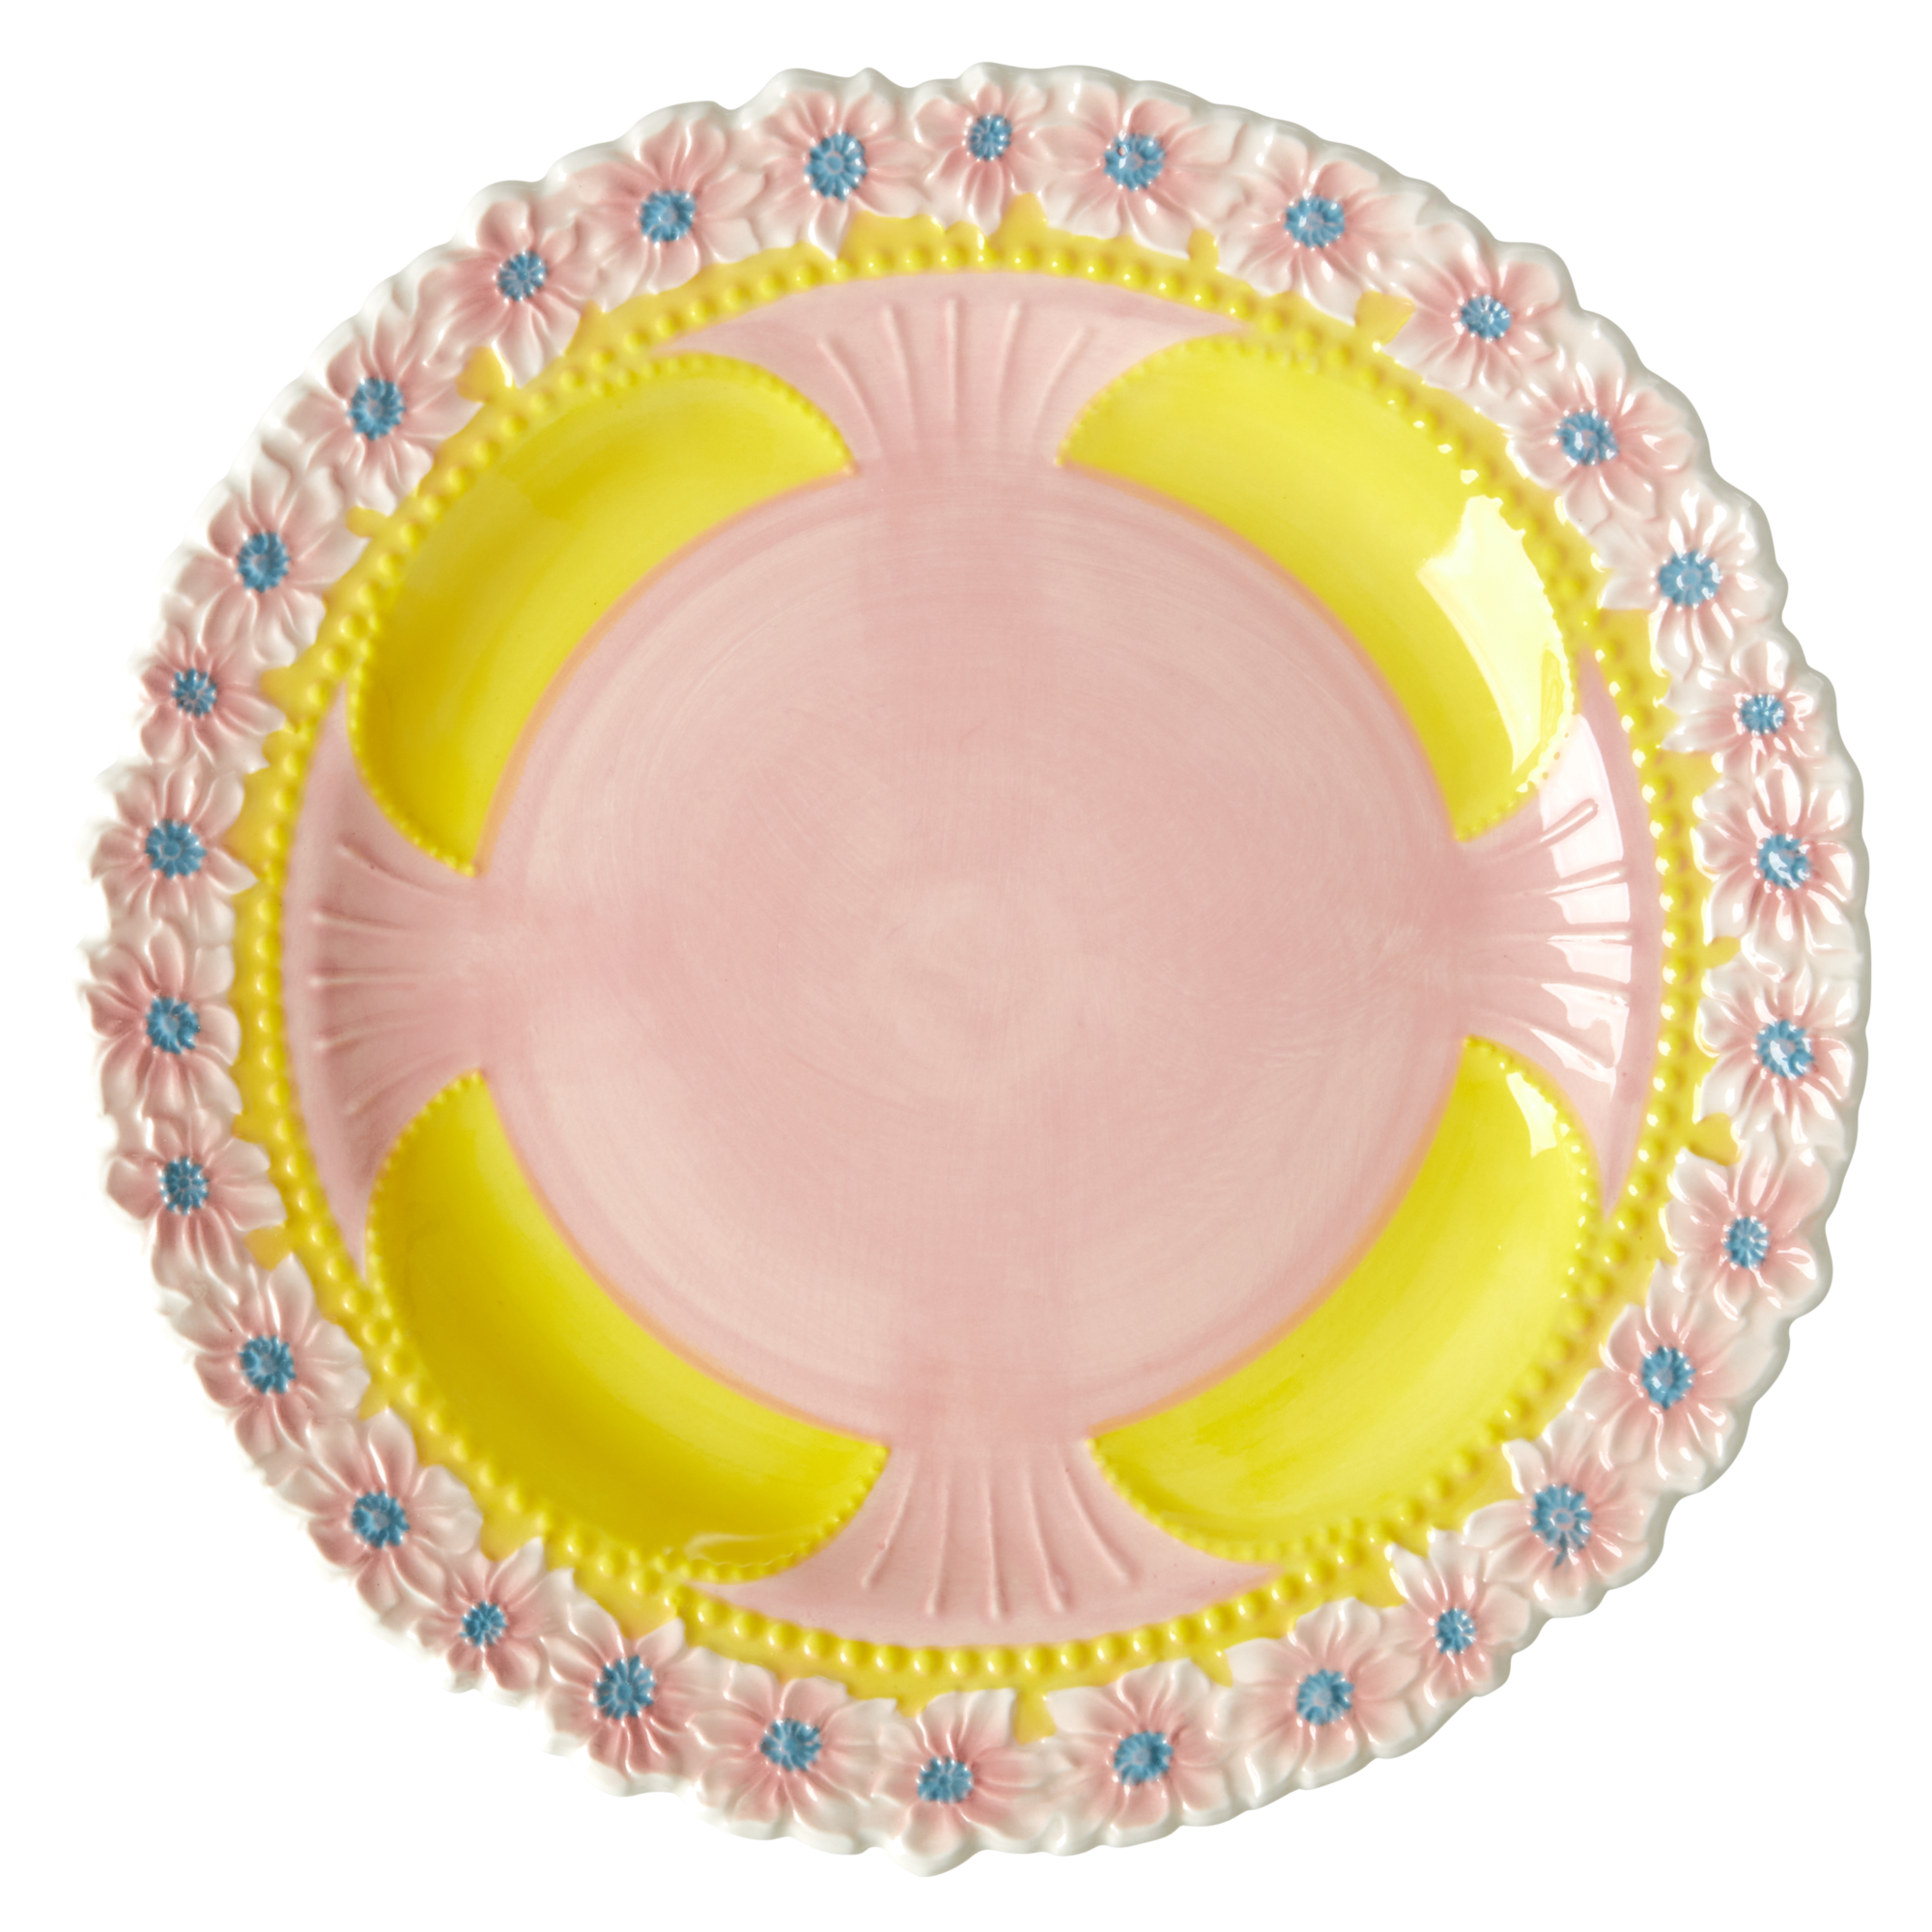 Rice - Ceramic Dinner Plate with Embossed Flower Design - Yellow